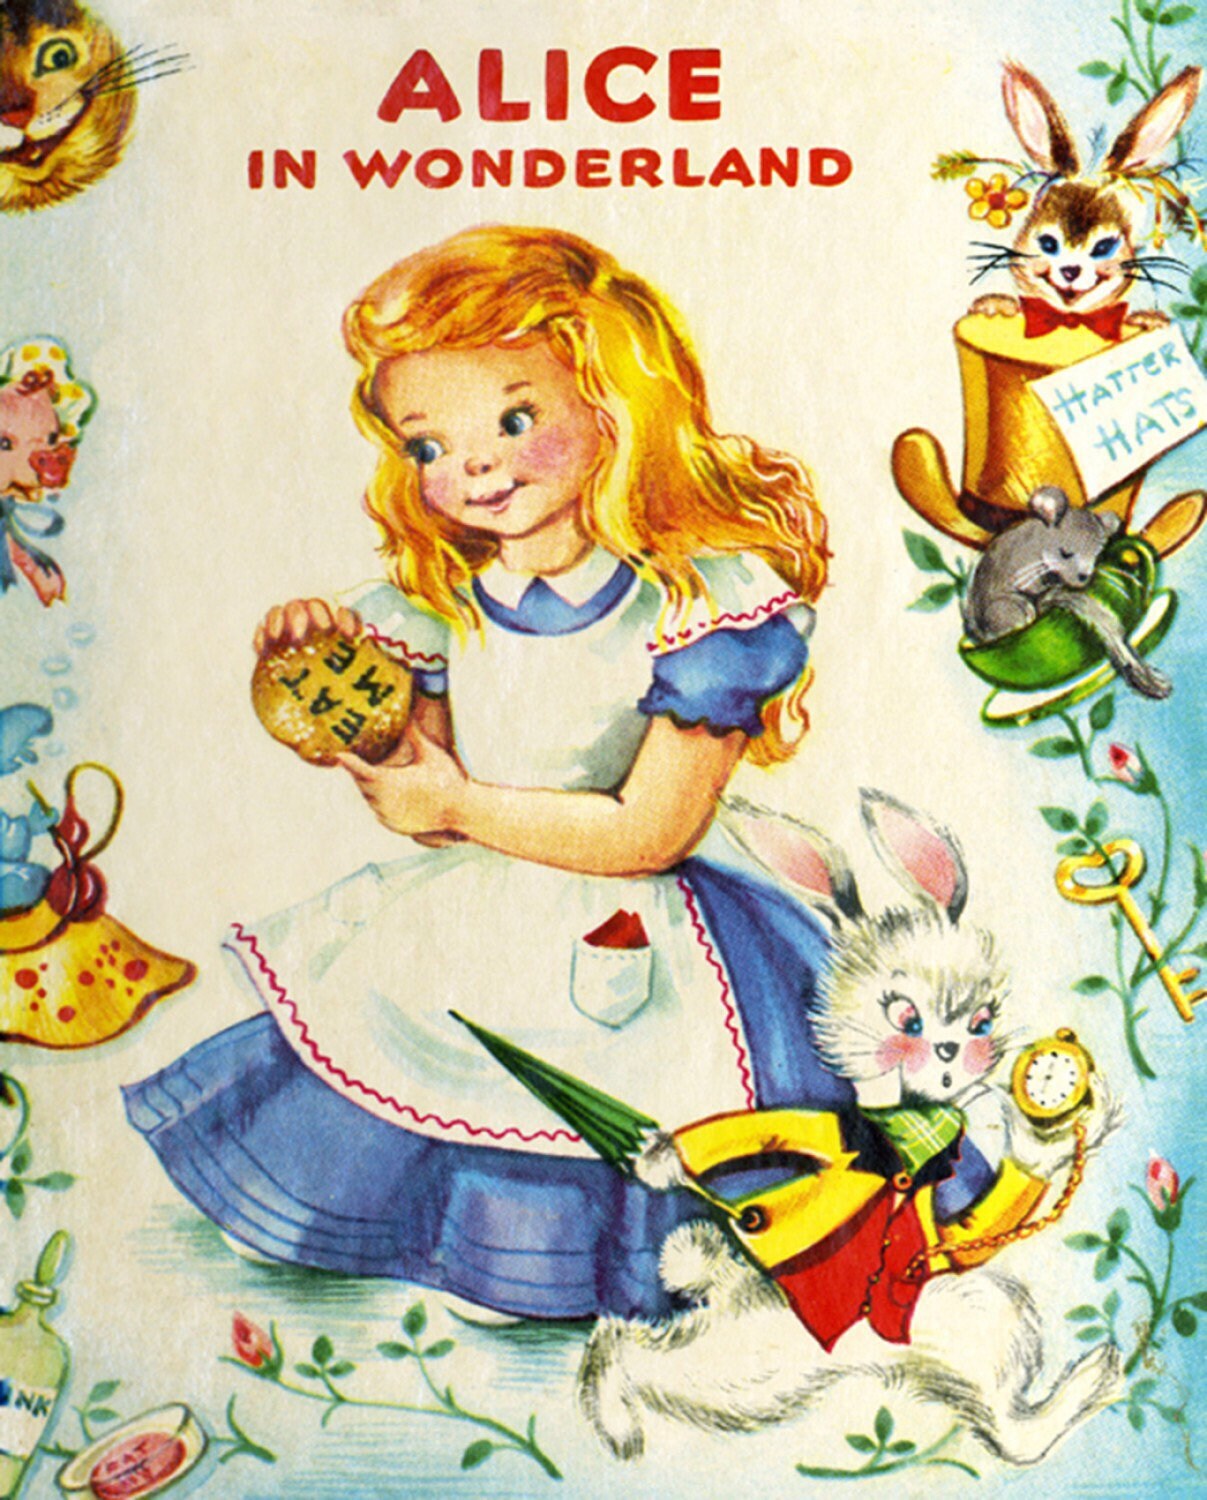 Vintage Storybook Alice in Wonderland Fabric Panel - 36” x 44” - Four Seasons by David Textiles